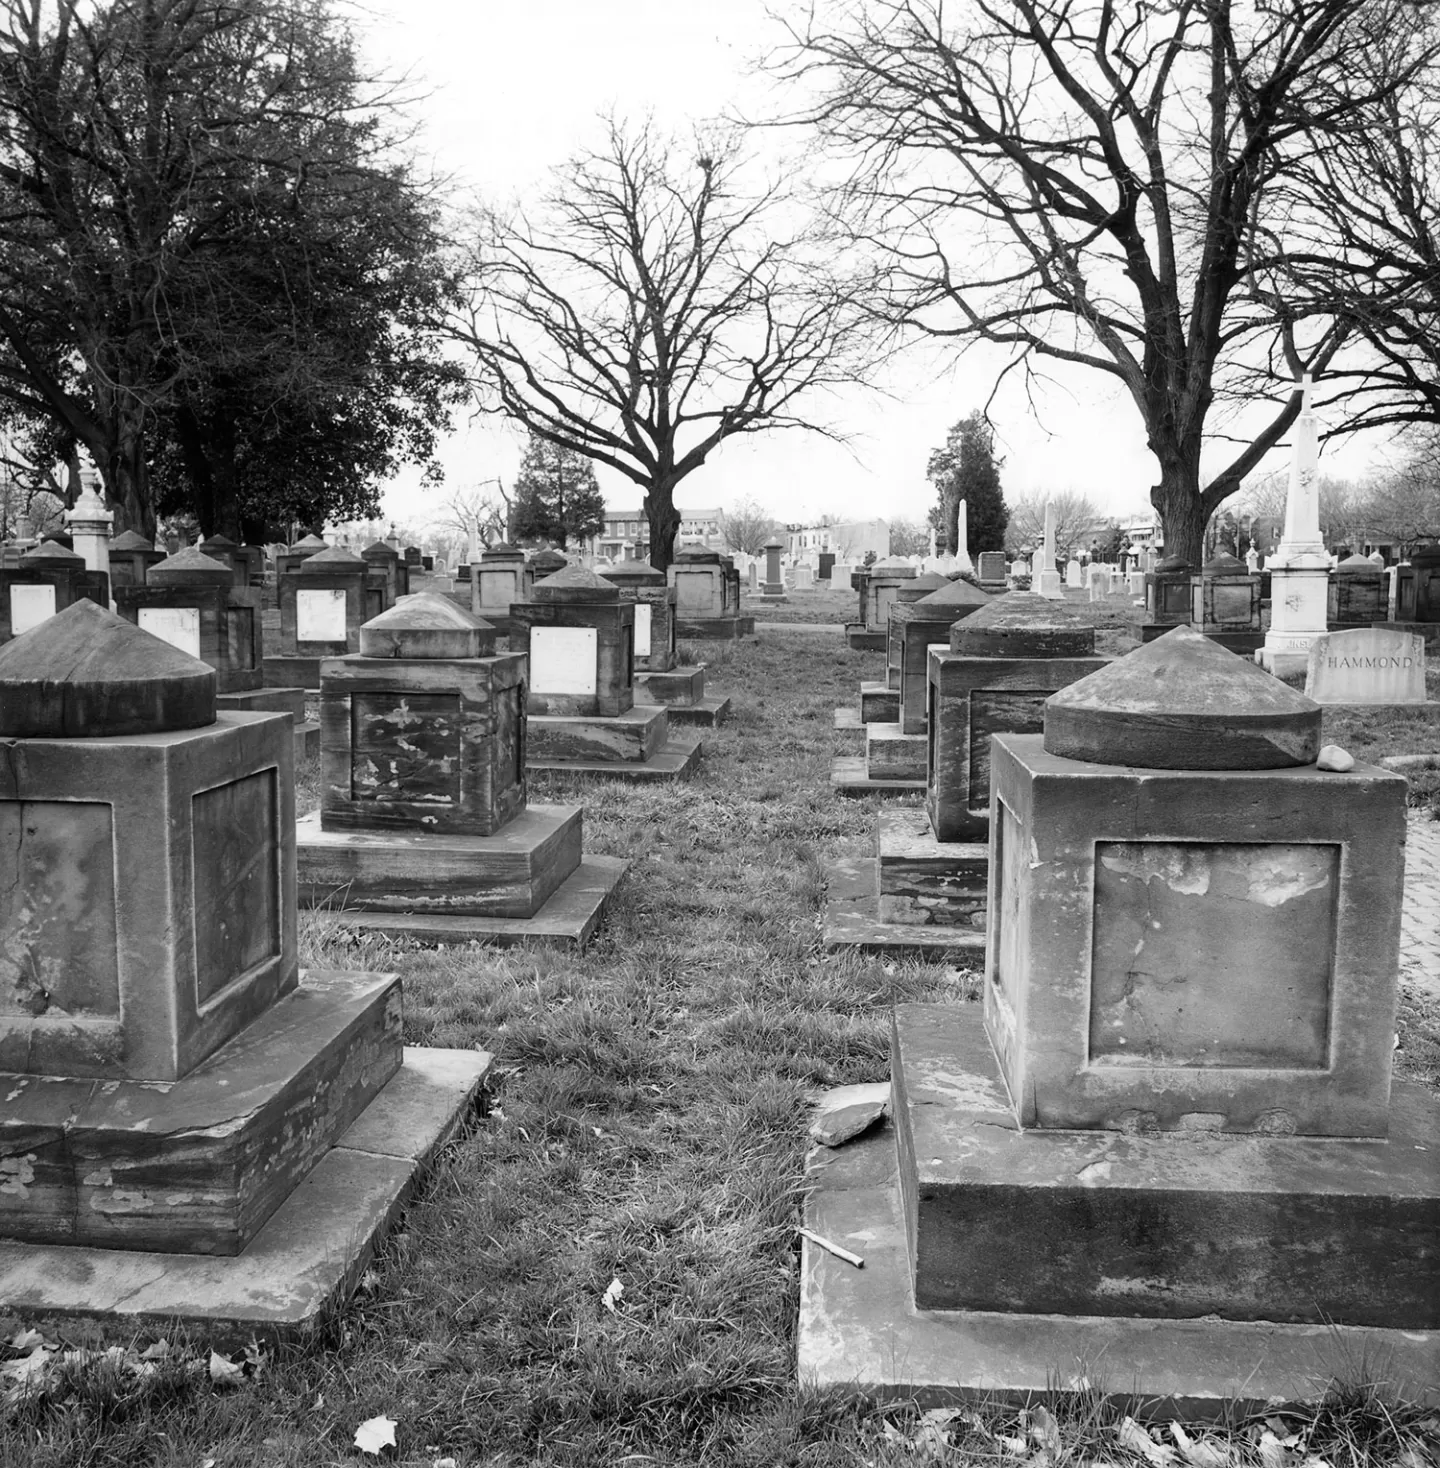 Congressional Cemetery in Washington, D.C.